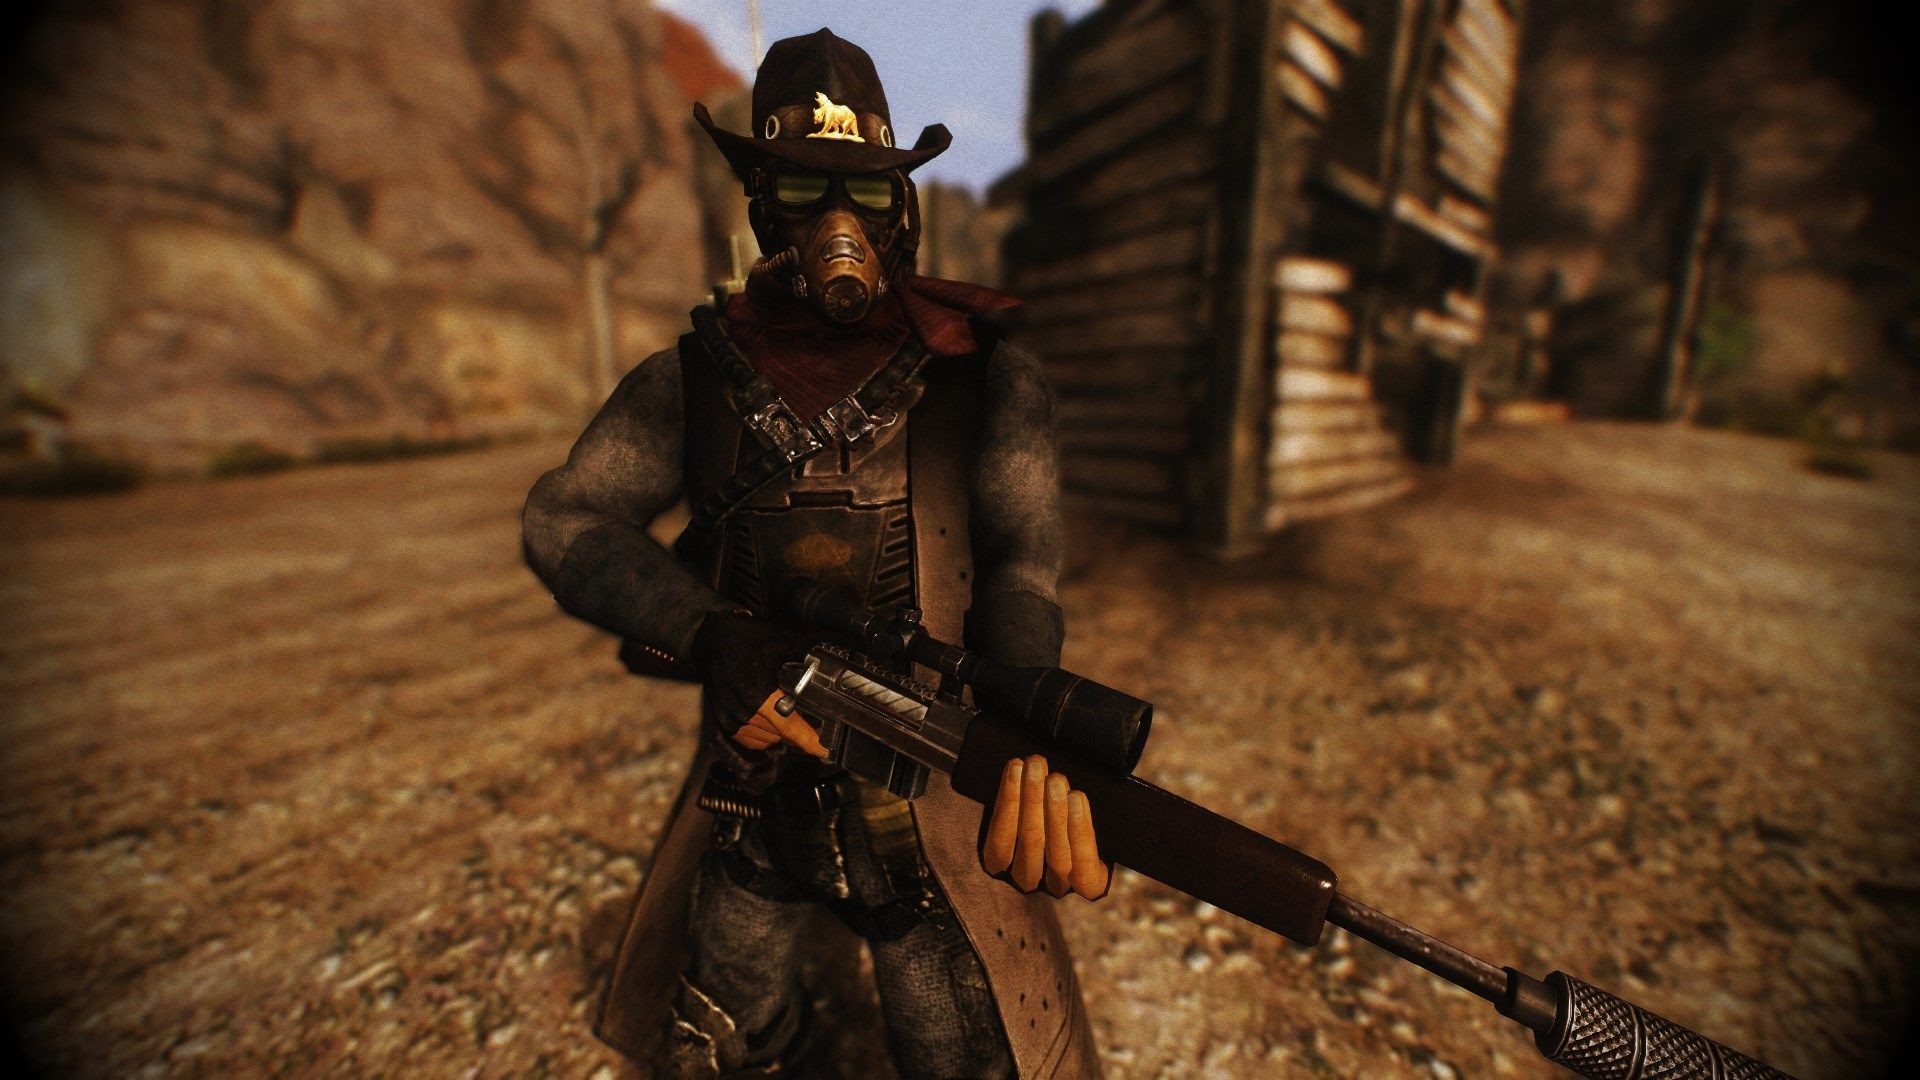 1920x1080 Fallout New Vegas Wallpaper Hd Pictures to Pin on Pinterest